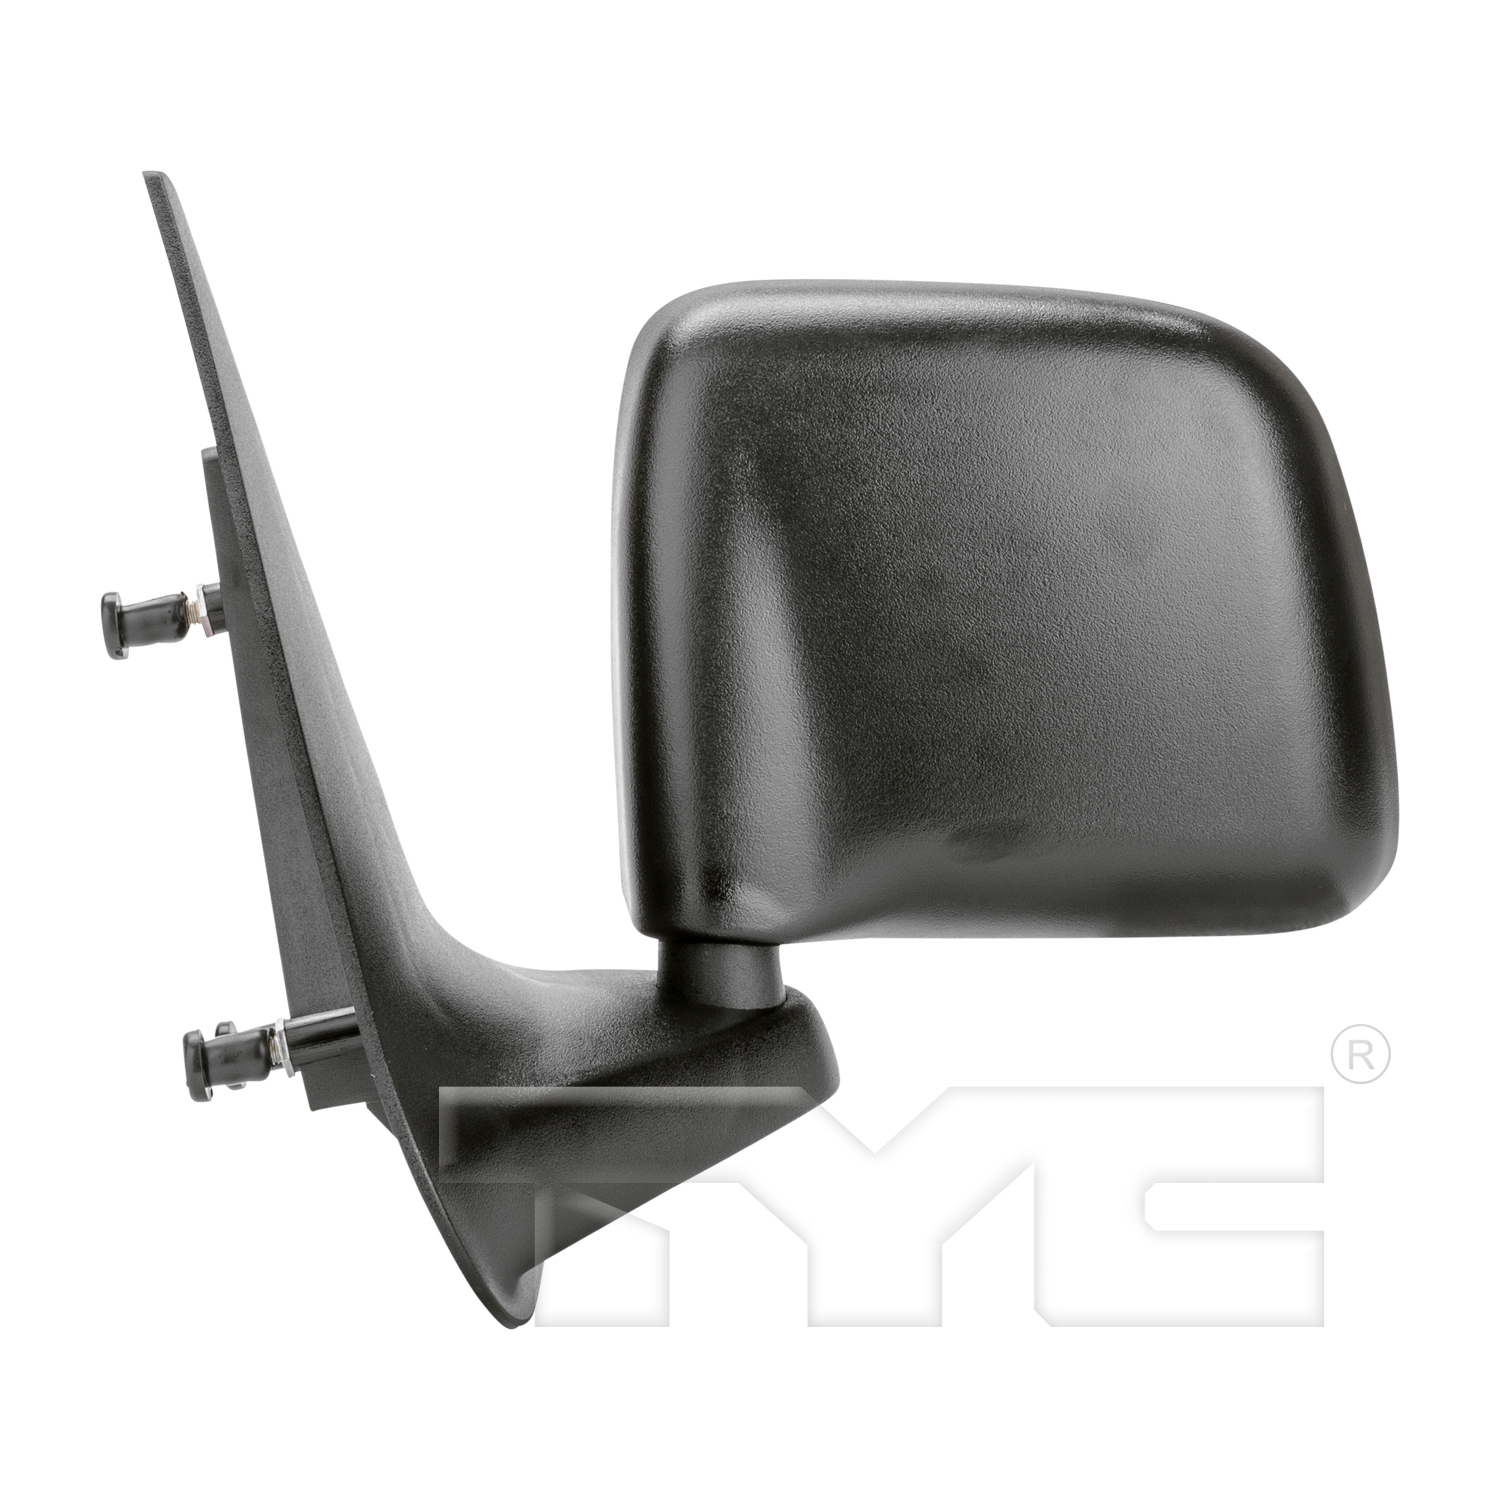 Aftermarket MIRRORS for MAZDA - B2300, B2300,94-97,LT Mirror outside rear view